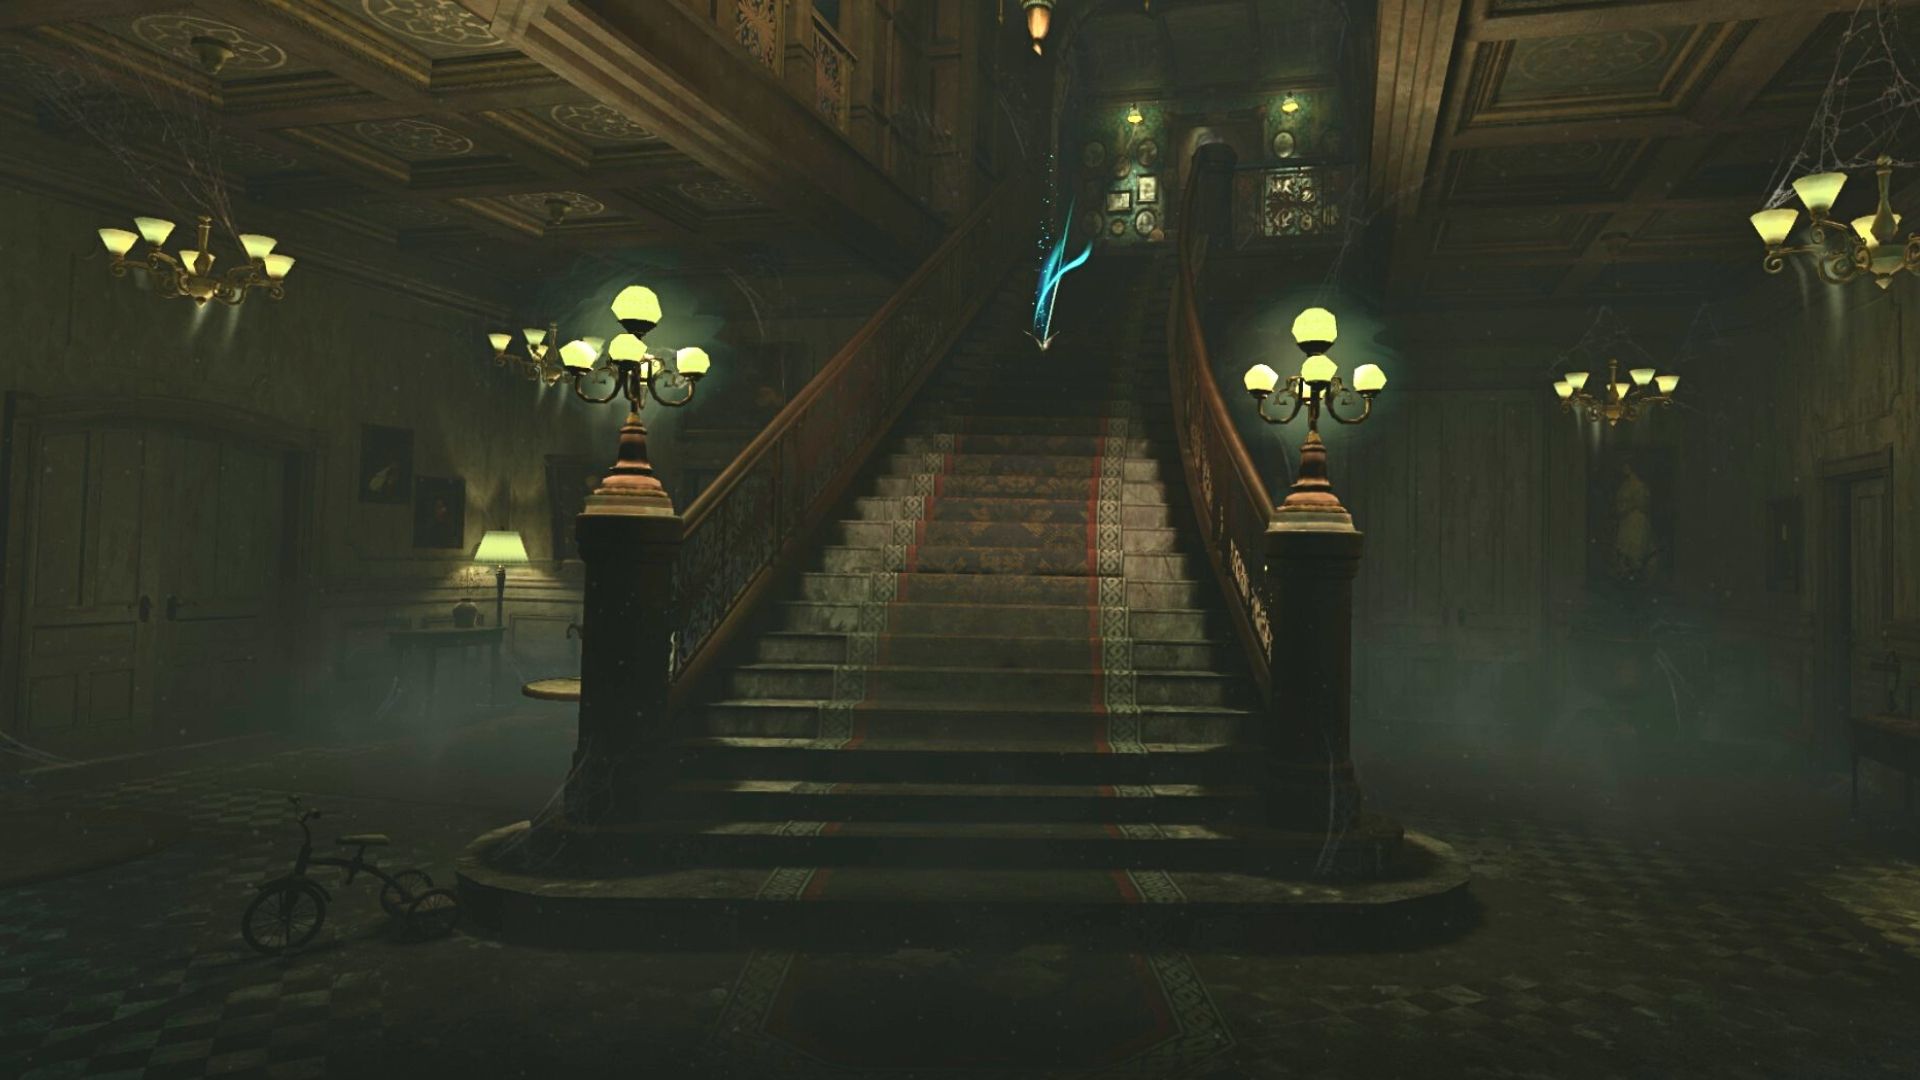 The grand staircase in 7th Guest VR